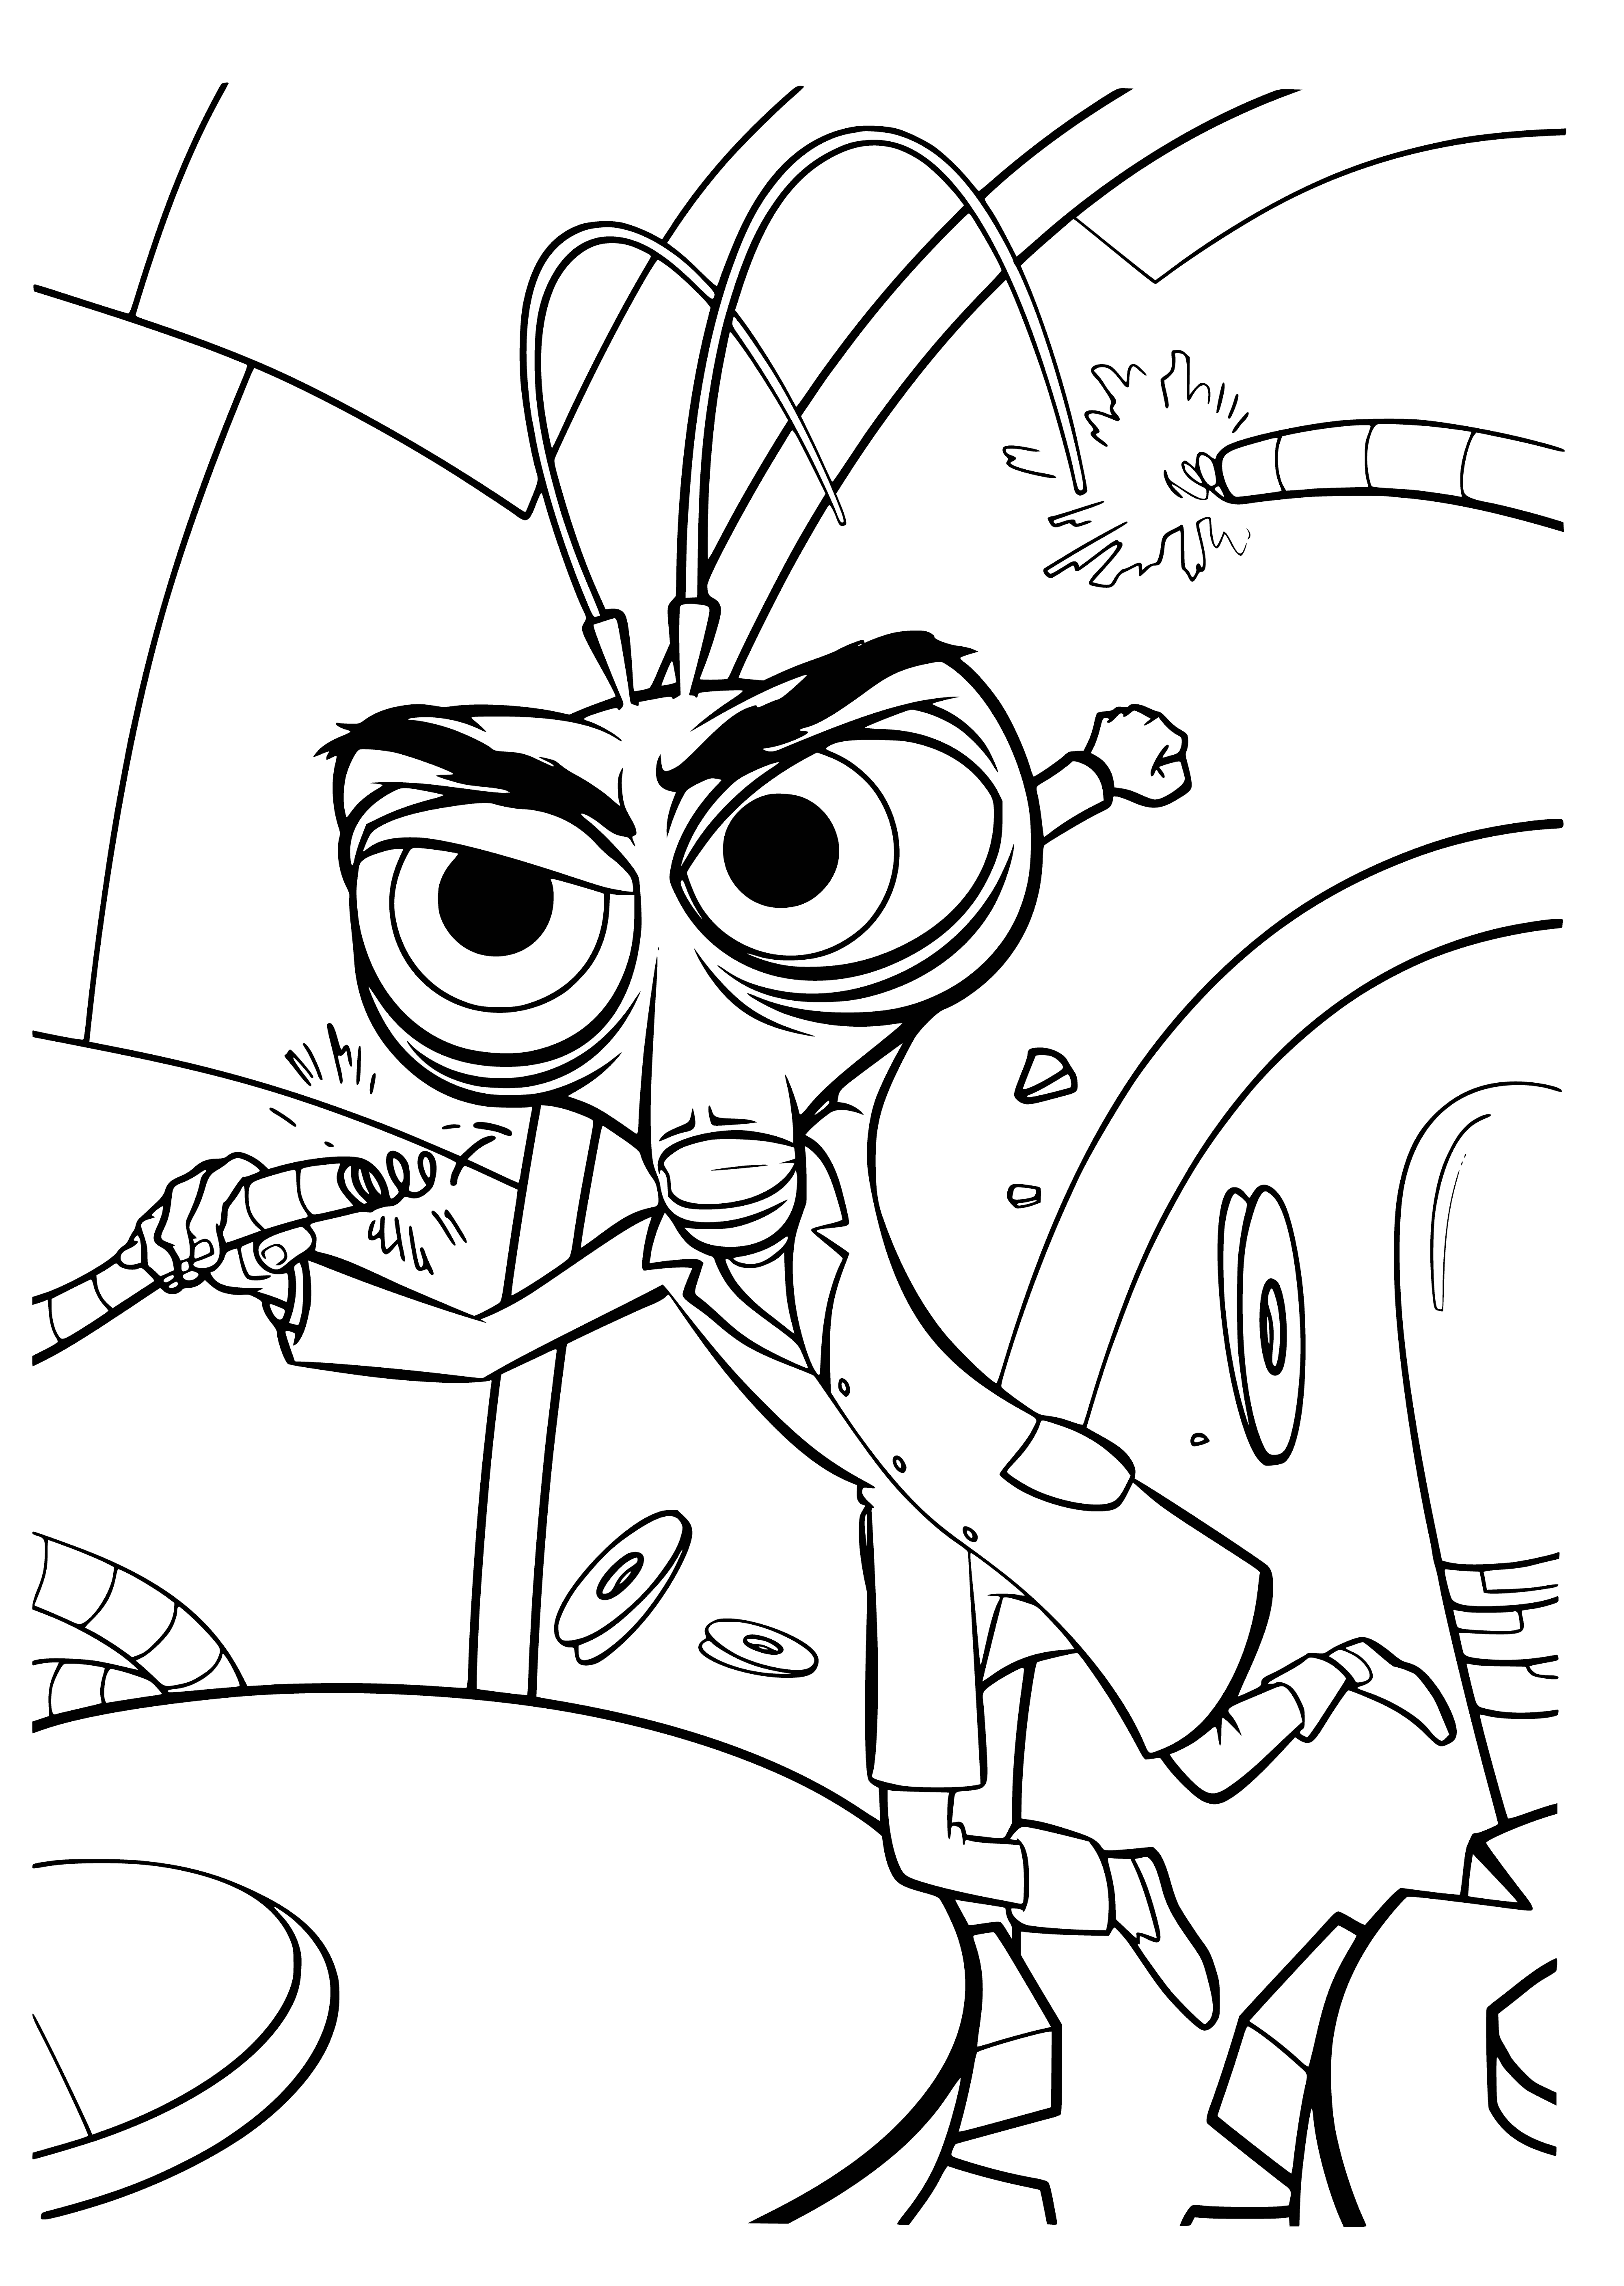 Dr. Cockroach coloring page